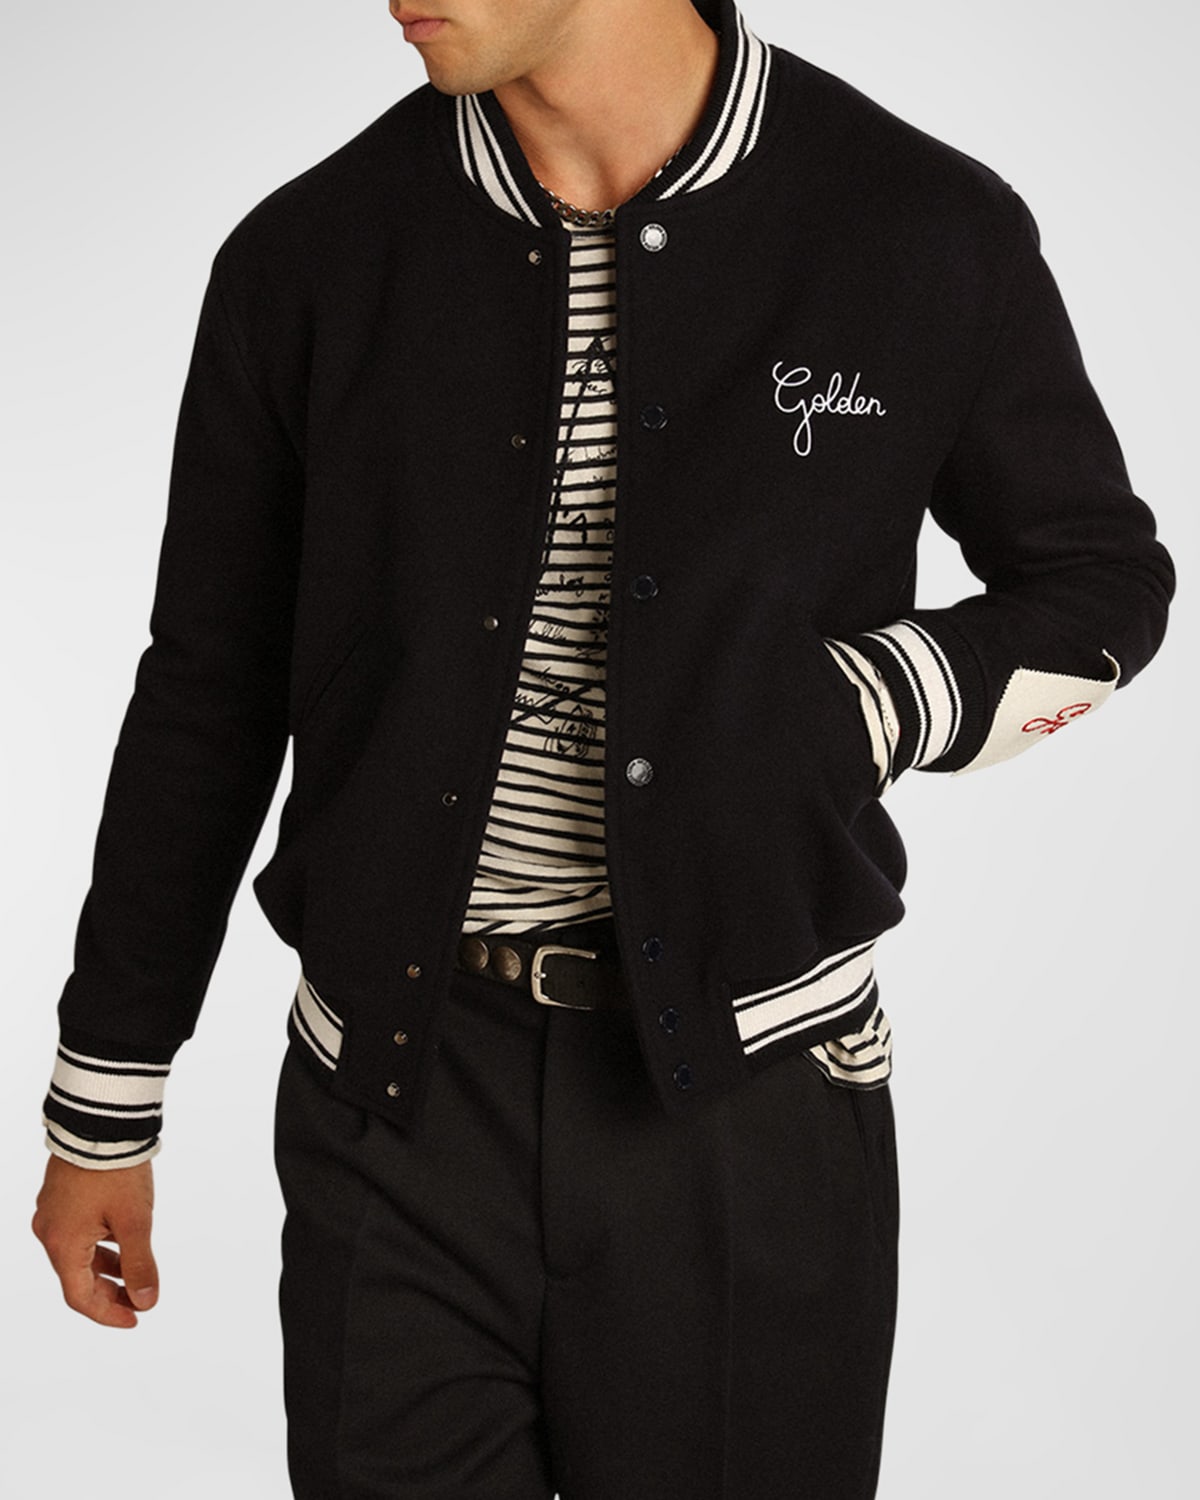 Men's Embroidered Compact Bomber Jacket